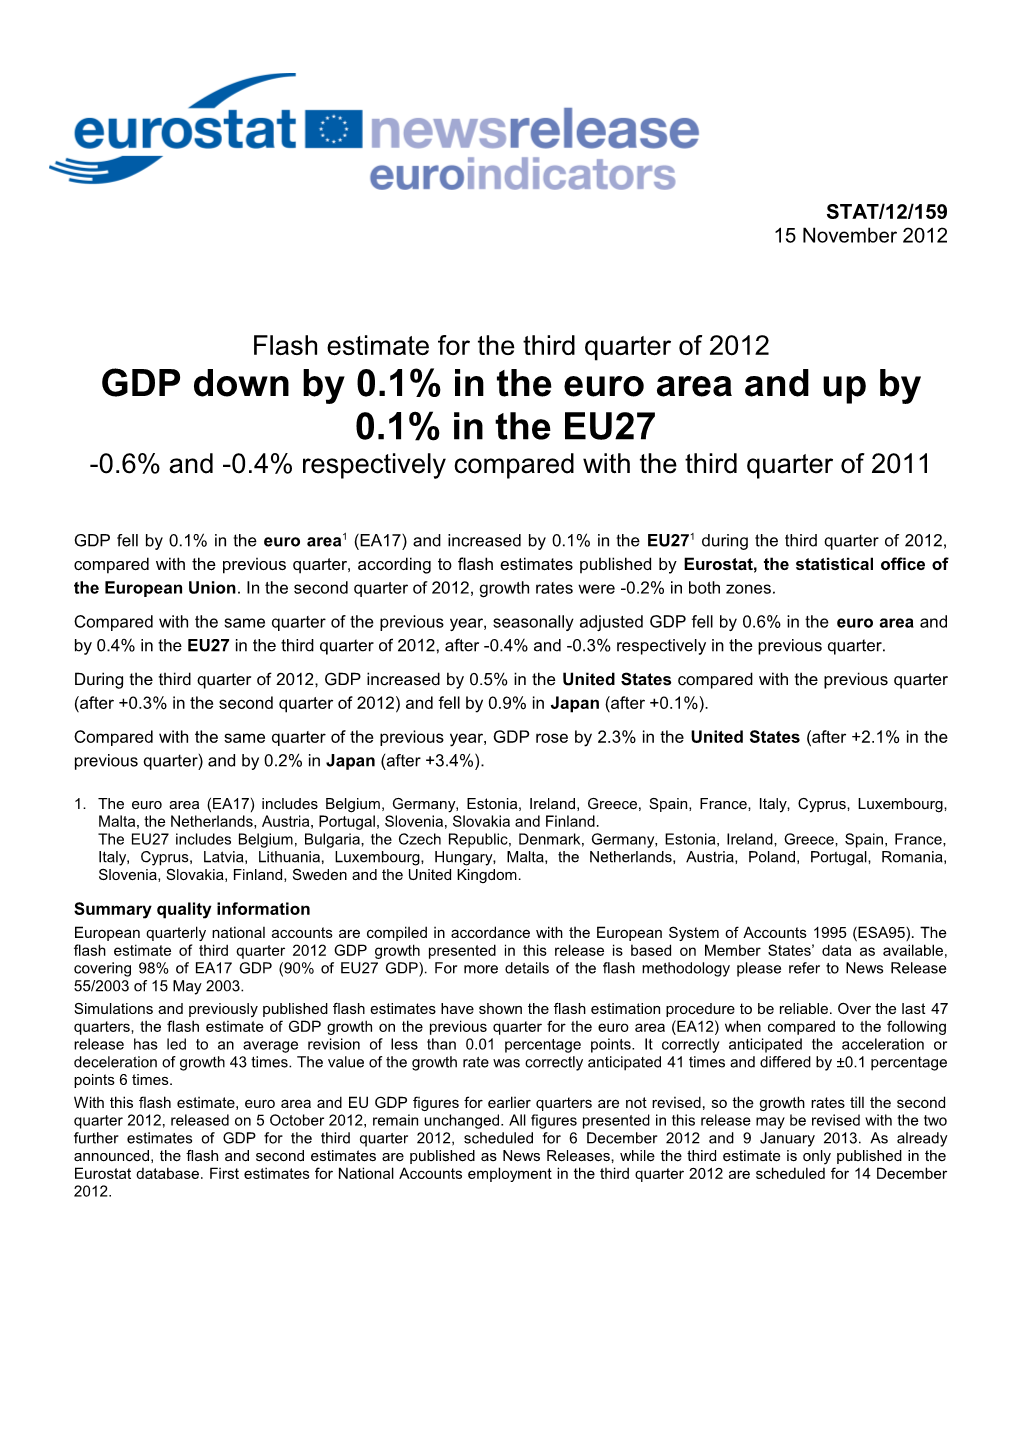 Flash Estimate for the Third Quarter of 2012 GDP Down by 0.1%In the Euro Area and up By